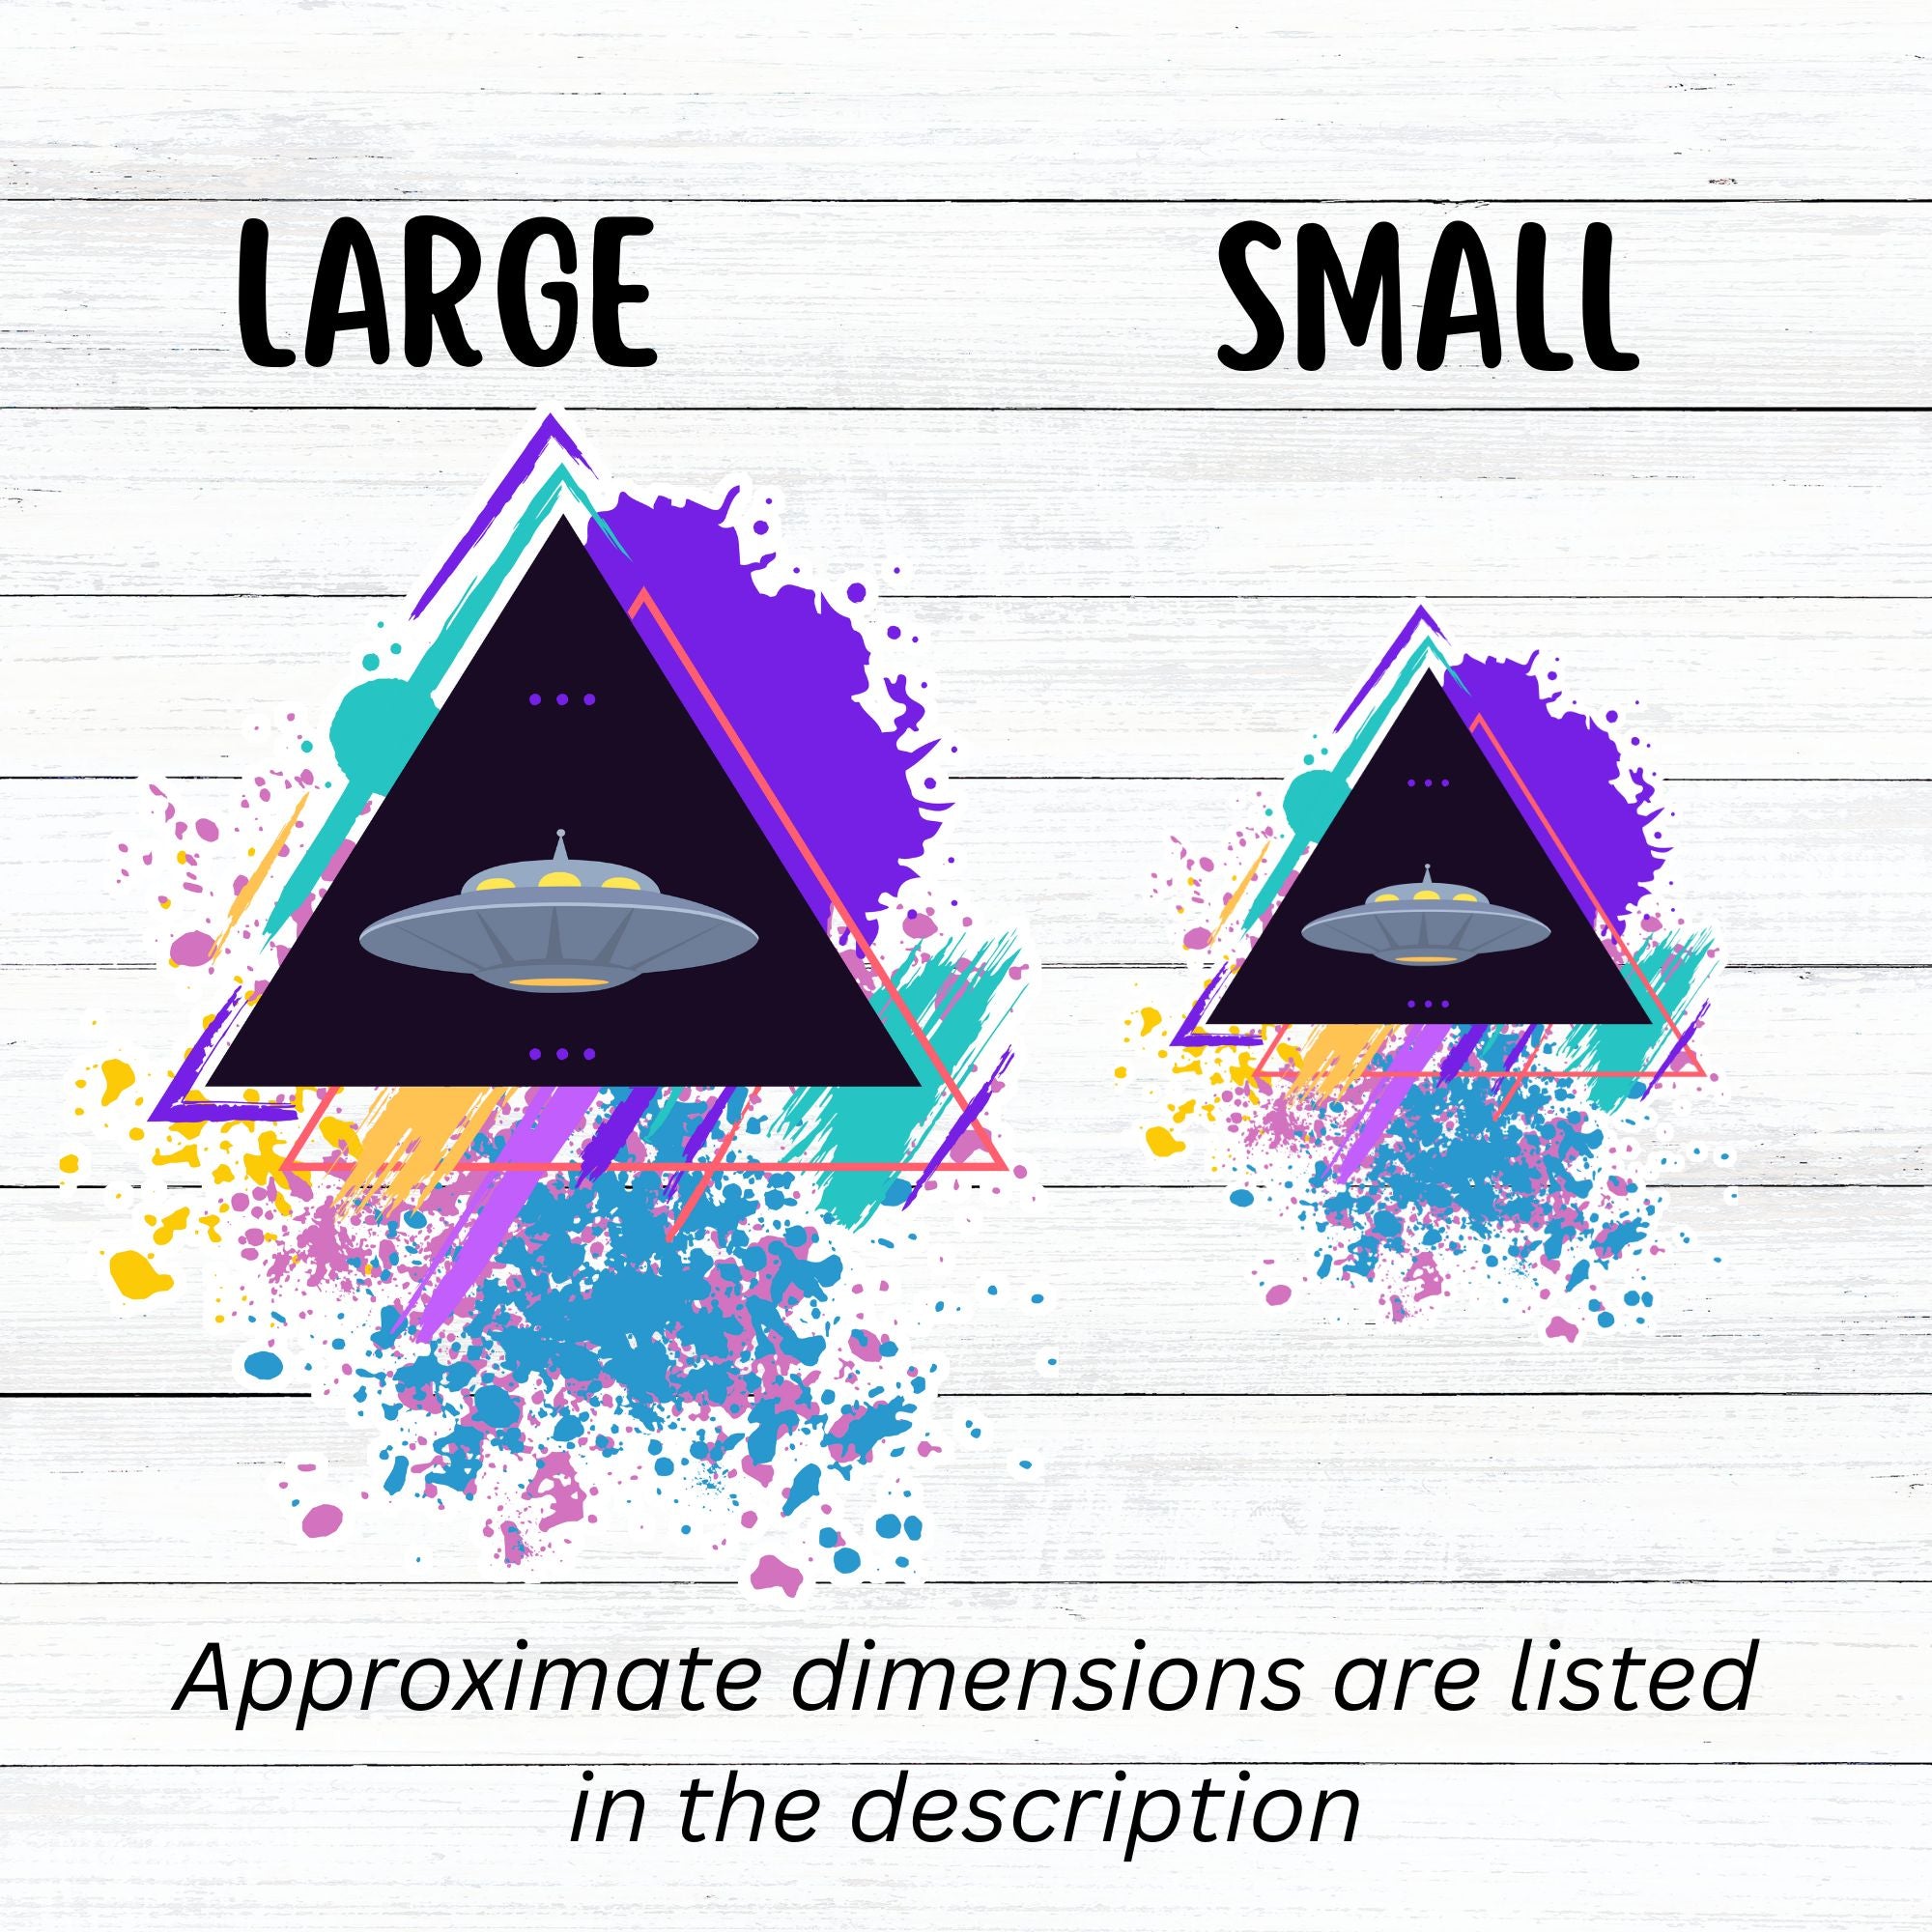 UFO alert! This individual die-cut sticker features an alien spaceship, UFO, on a black triangle background with pastel paint splatters behind. This image shows large and small UFO stickers next to each other.